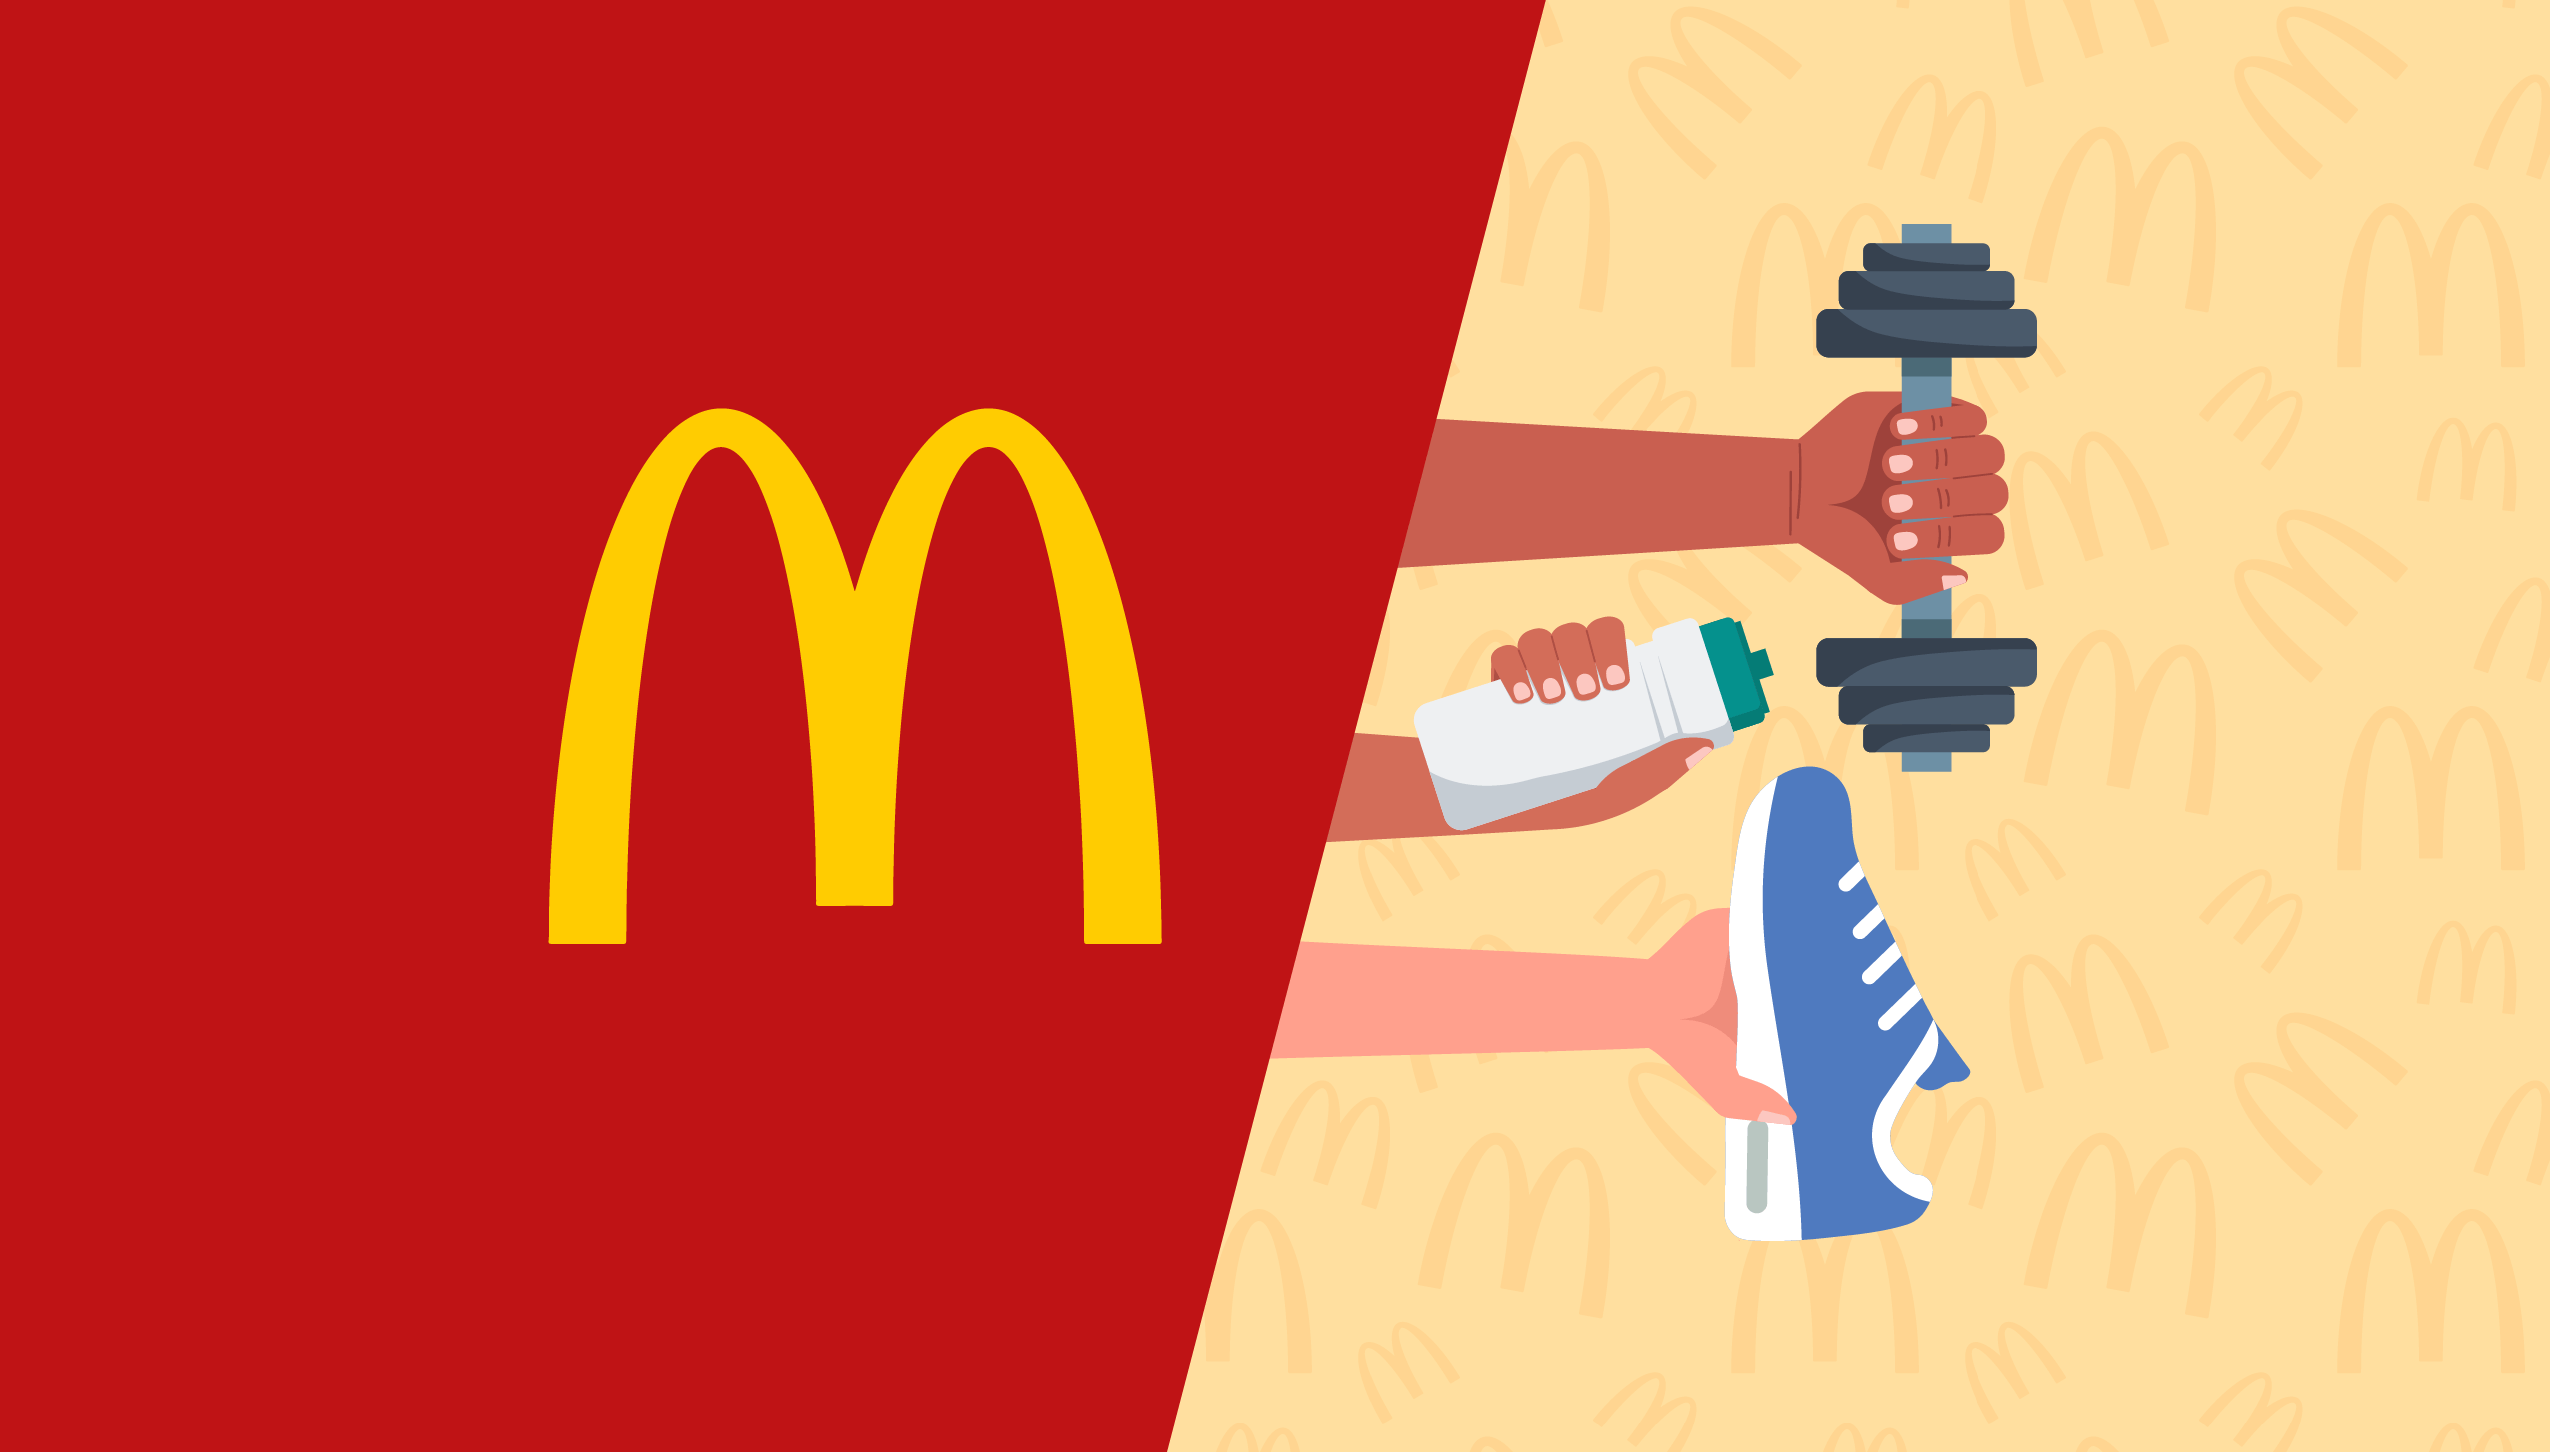 Do McDonald's fries go well with your workout?